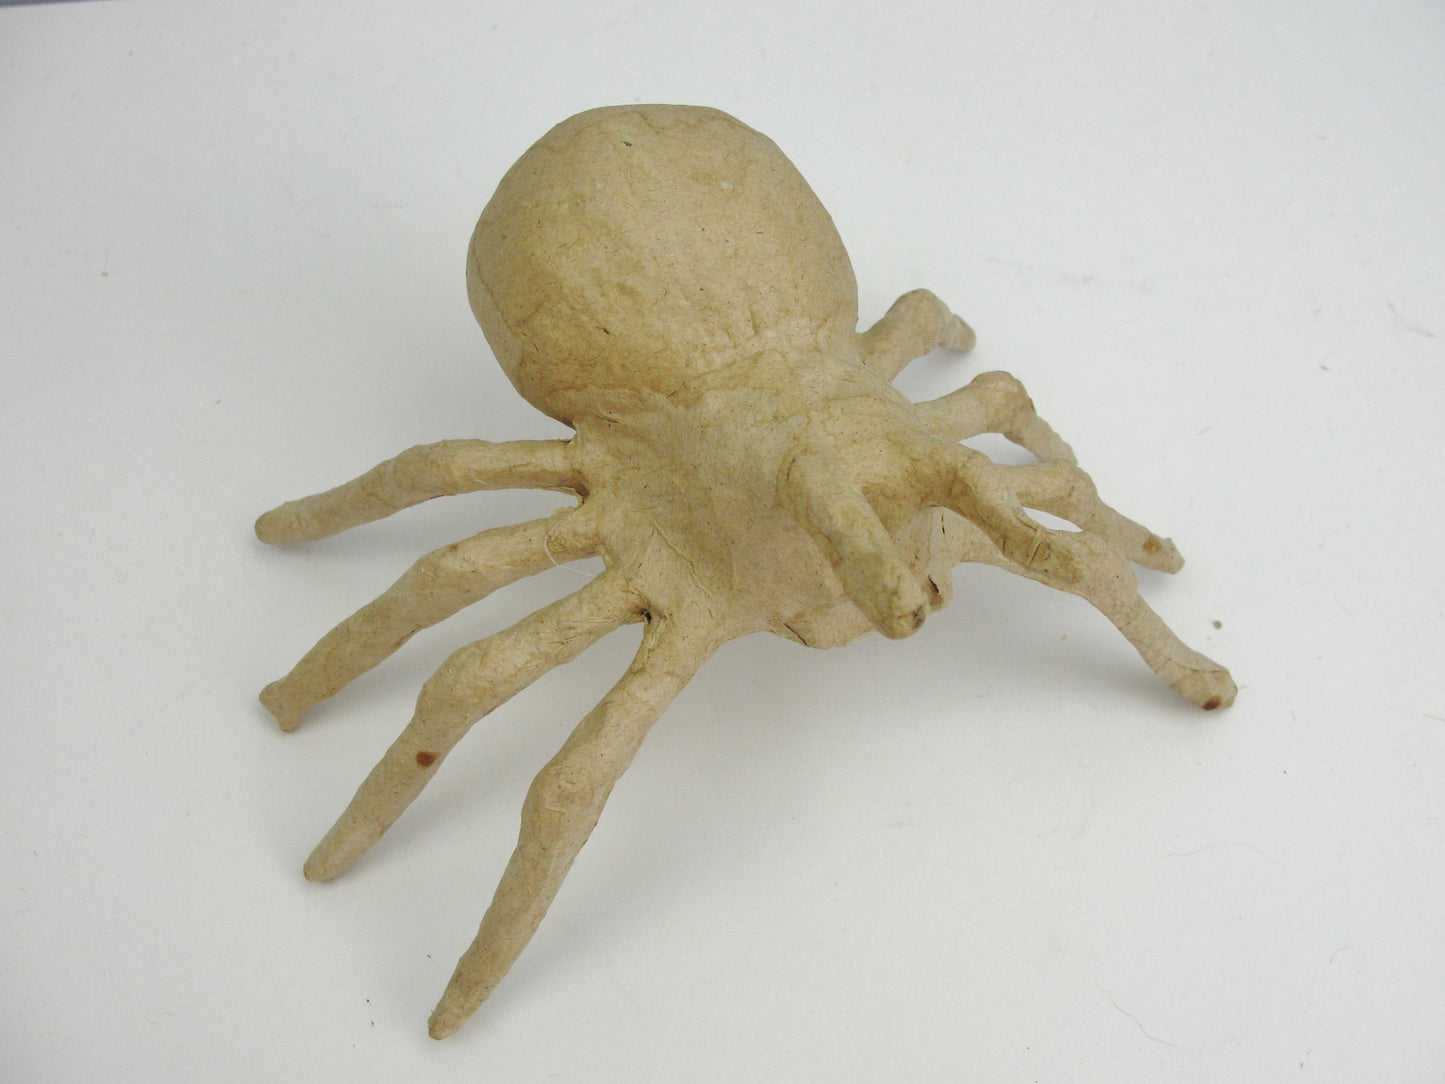 Oversized large paper mache spider